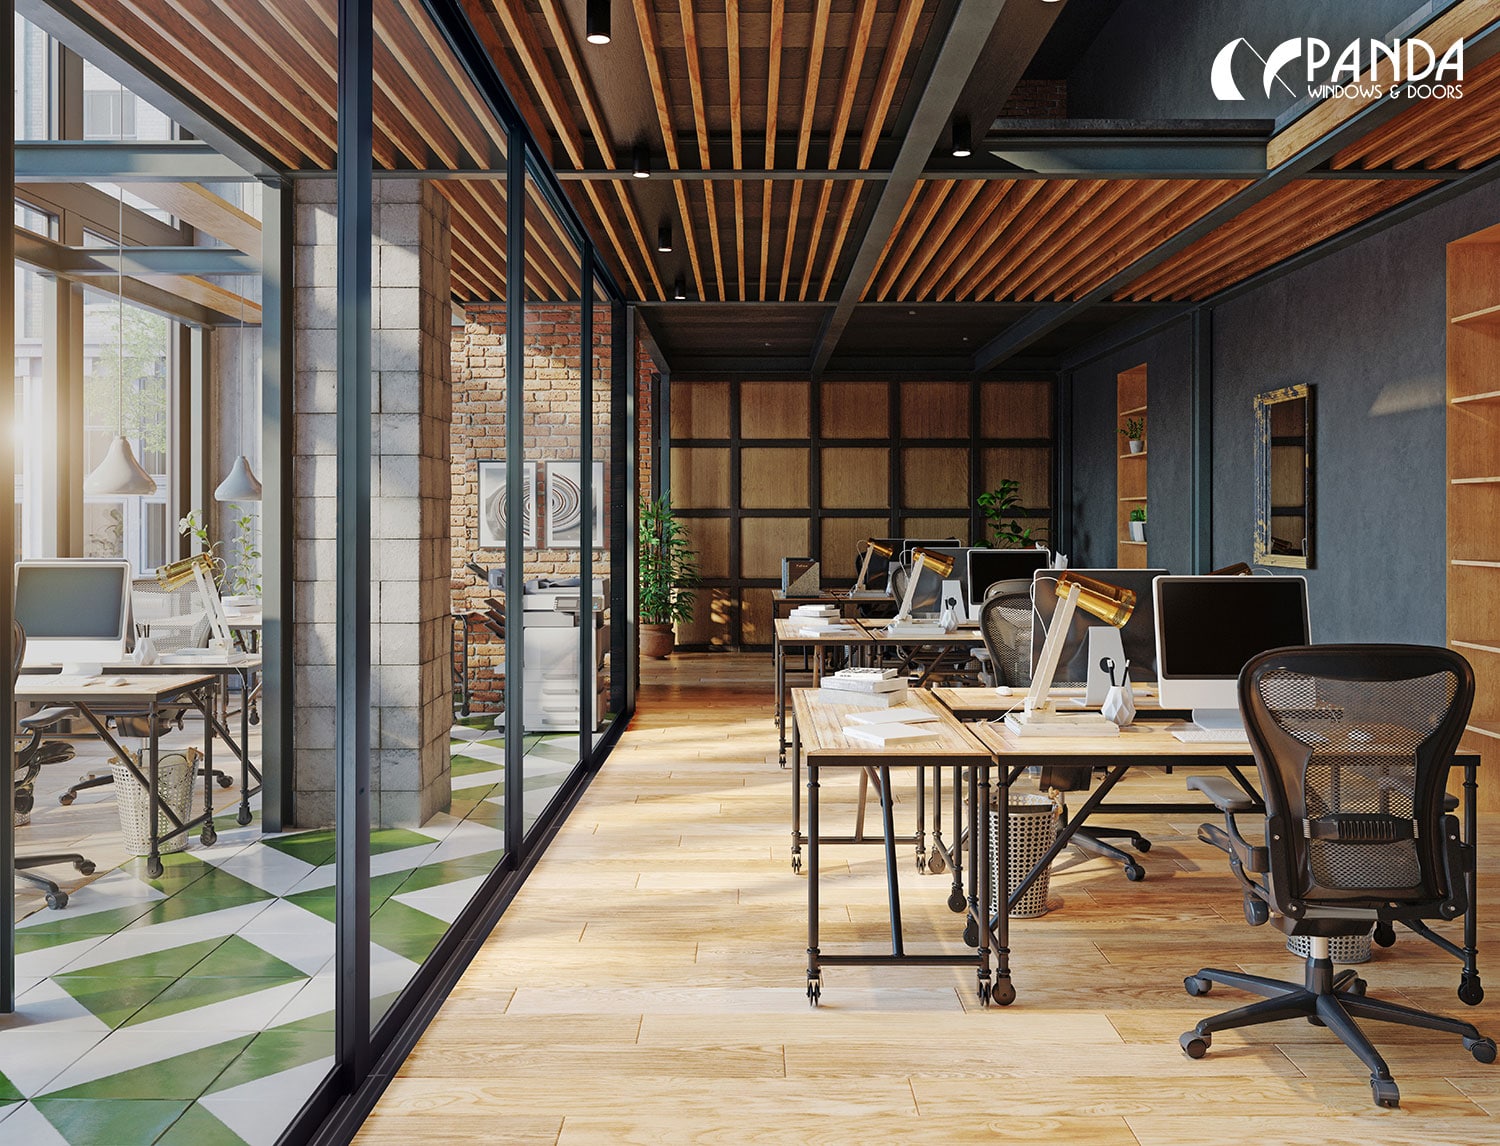 Improve Productivity and Relieve Stress Through Biophilic Design